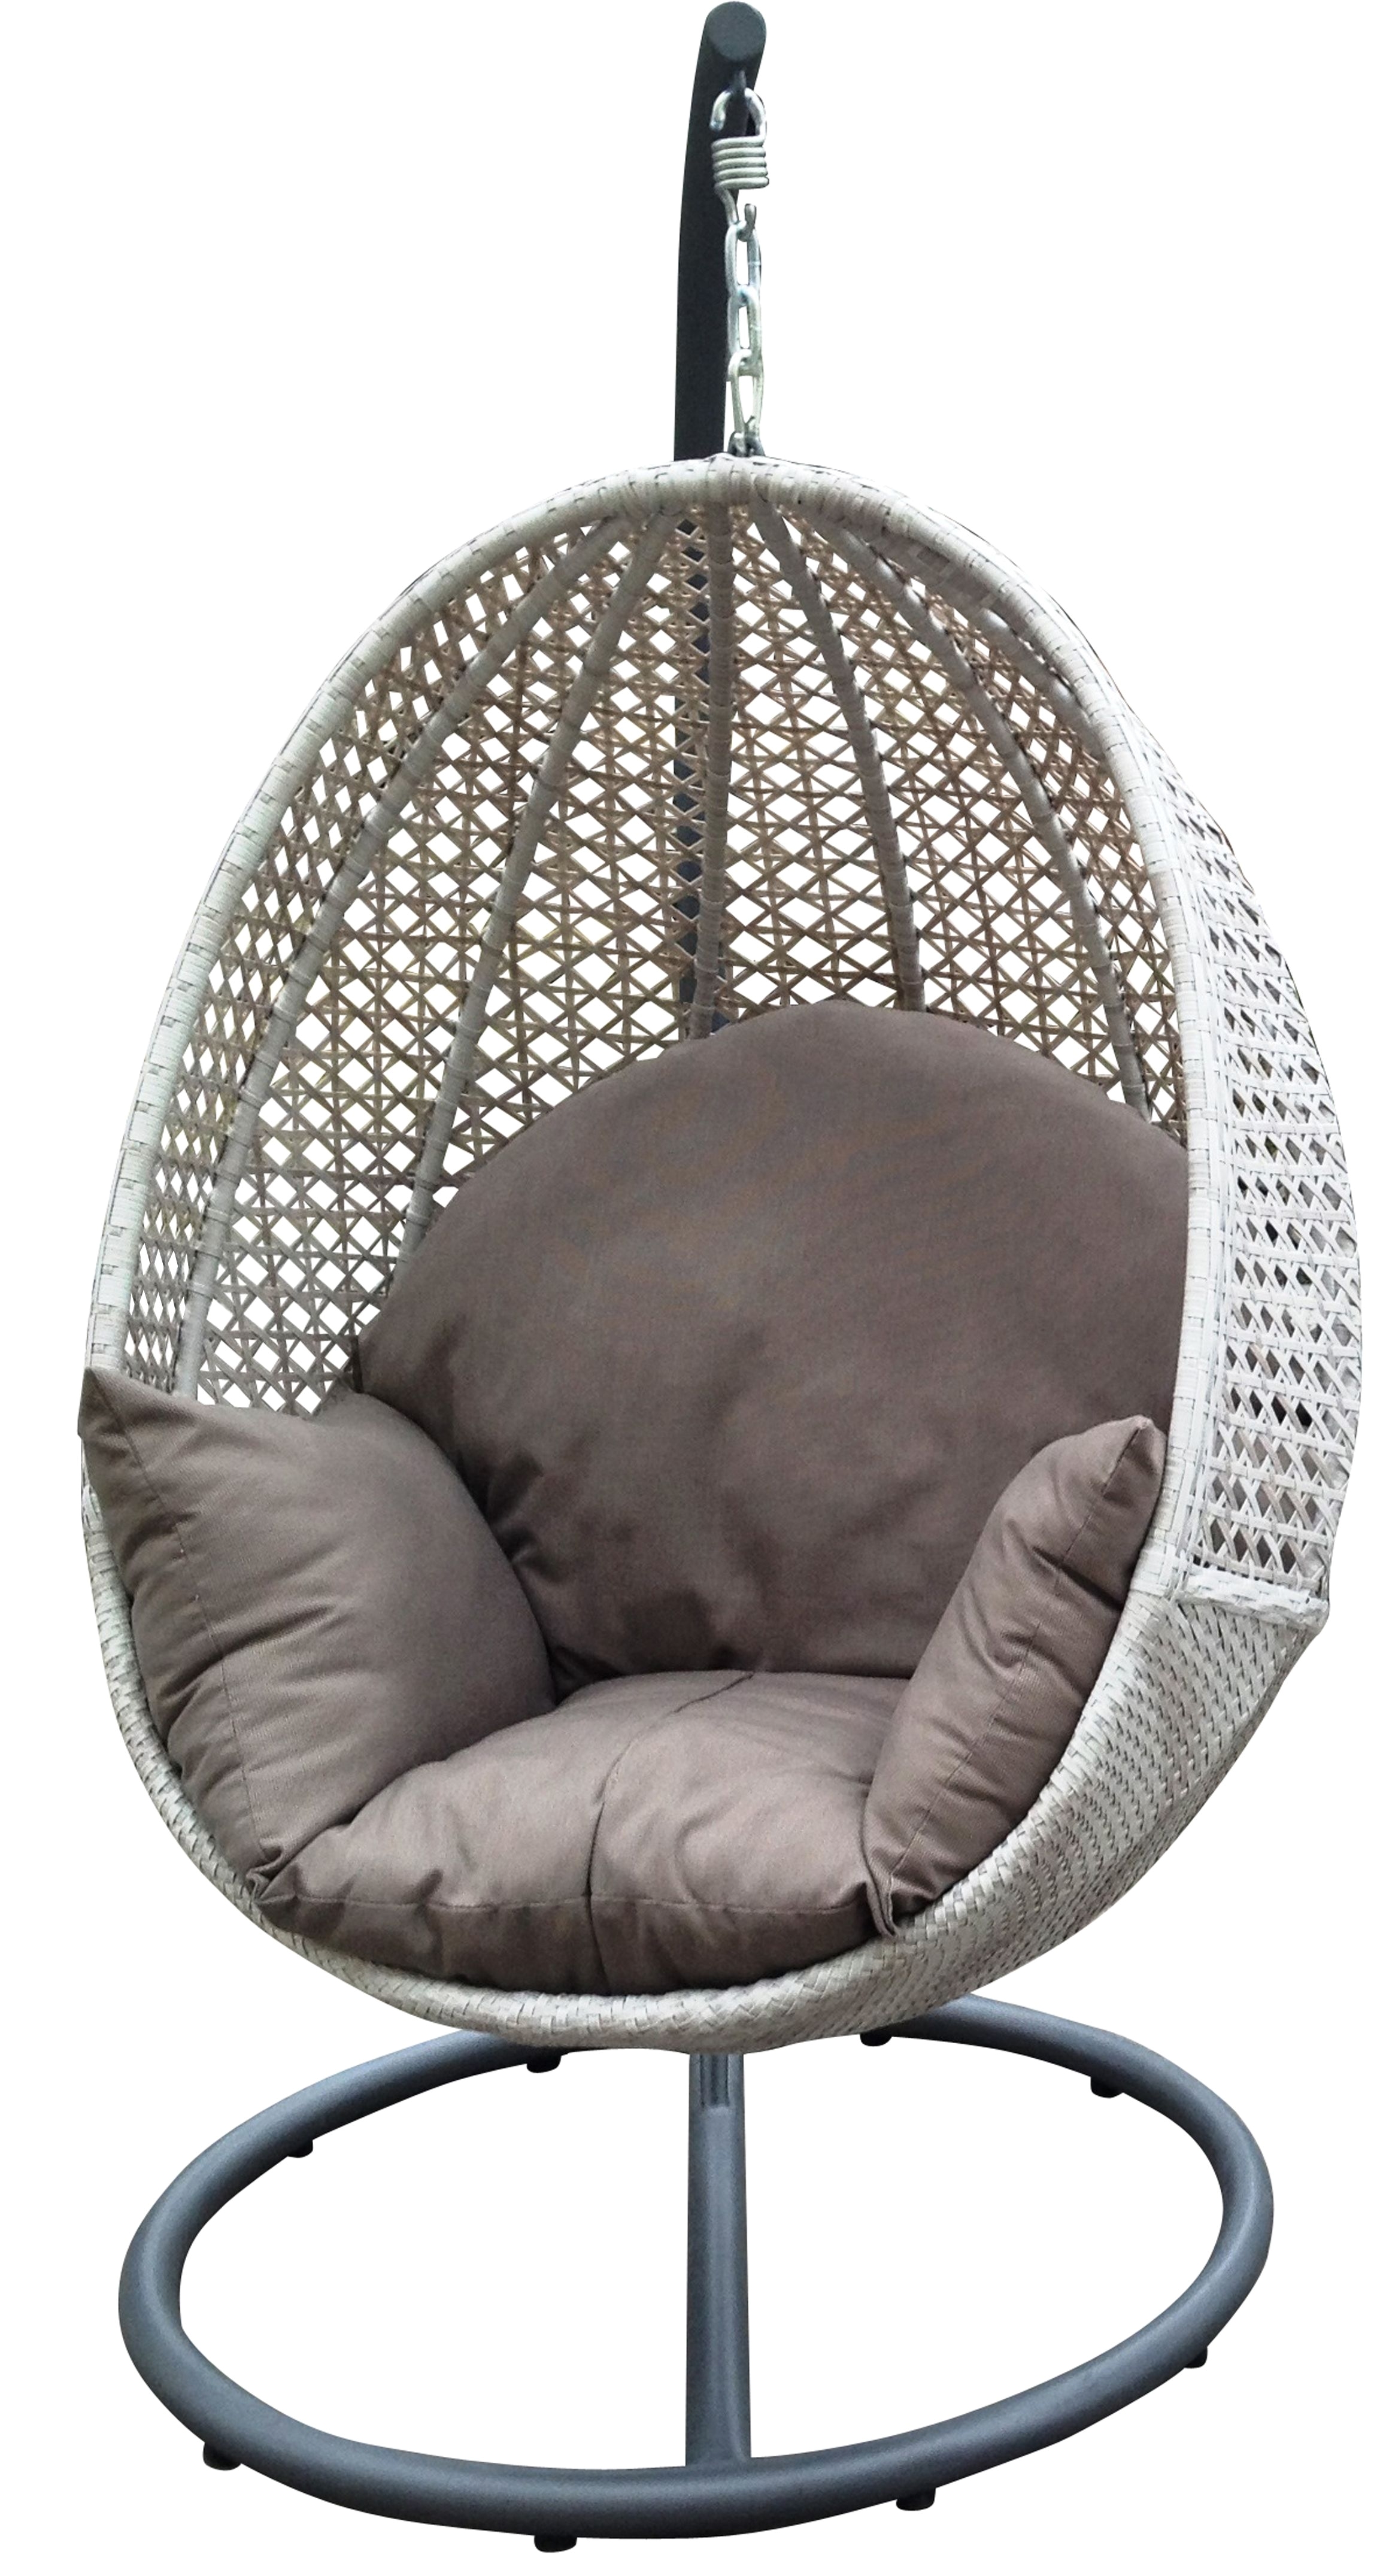 Egg Chairs that Hang From the Ceiling Outdoor Hanging Egg Chair Available at Drovers Inside Out Perth